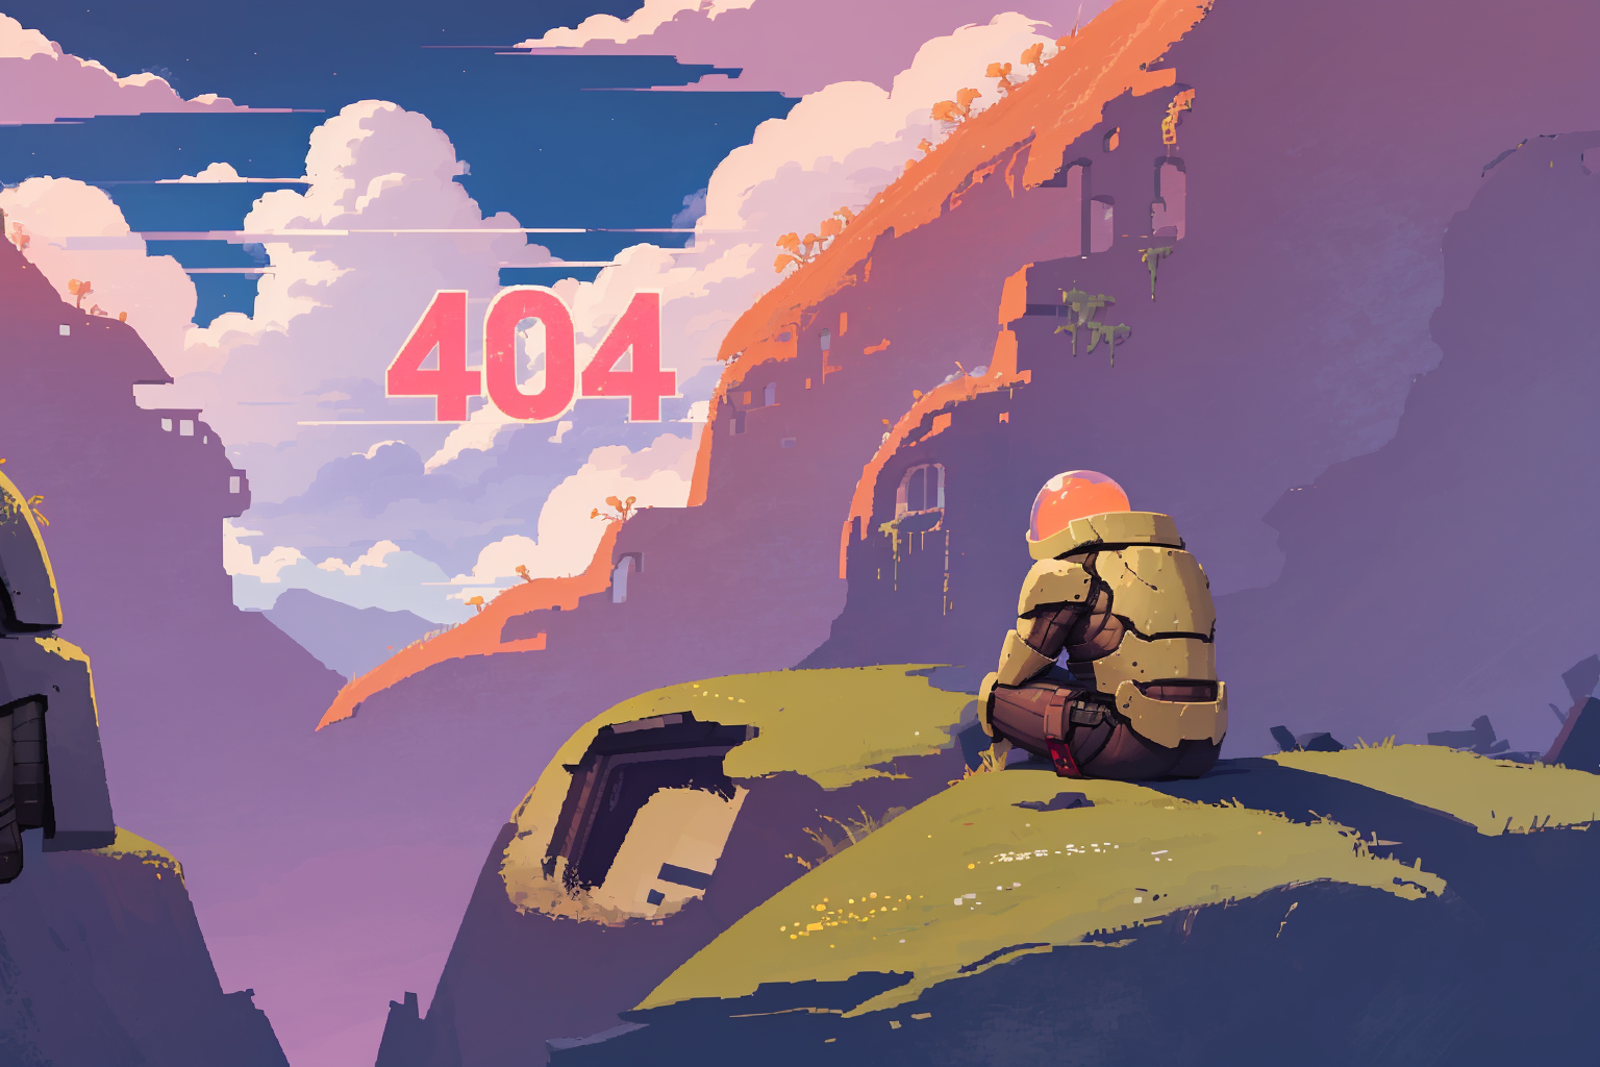 The 404 Error: A Robot's Journey to Find Its Purpose in a Post-Apocalyptic World